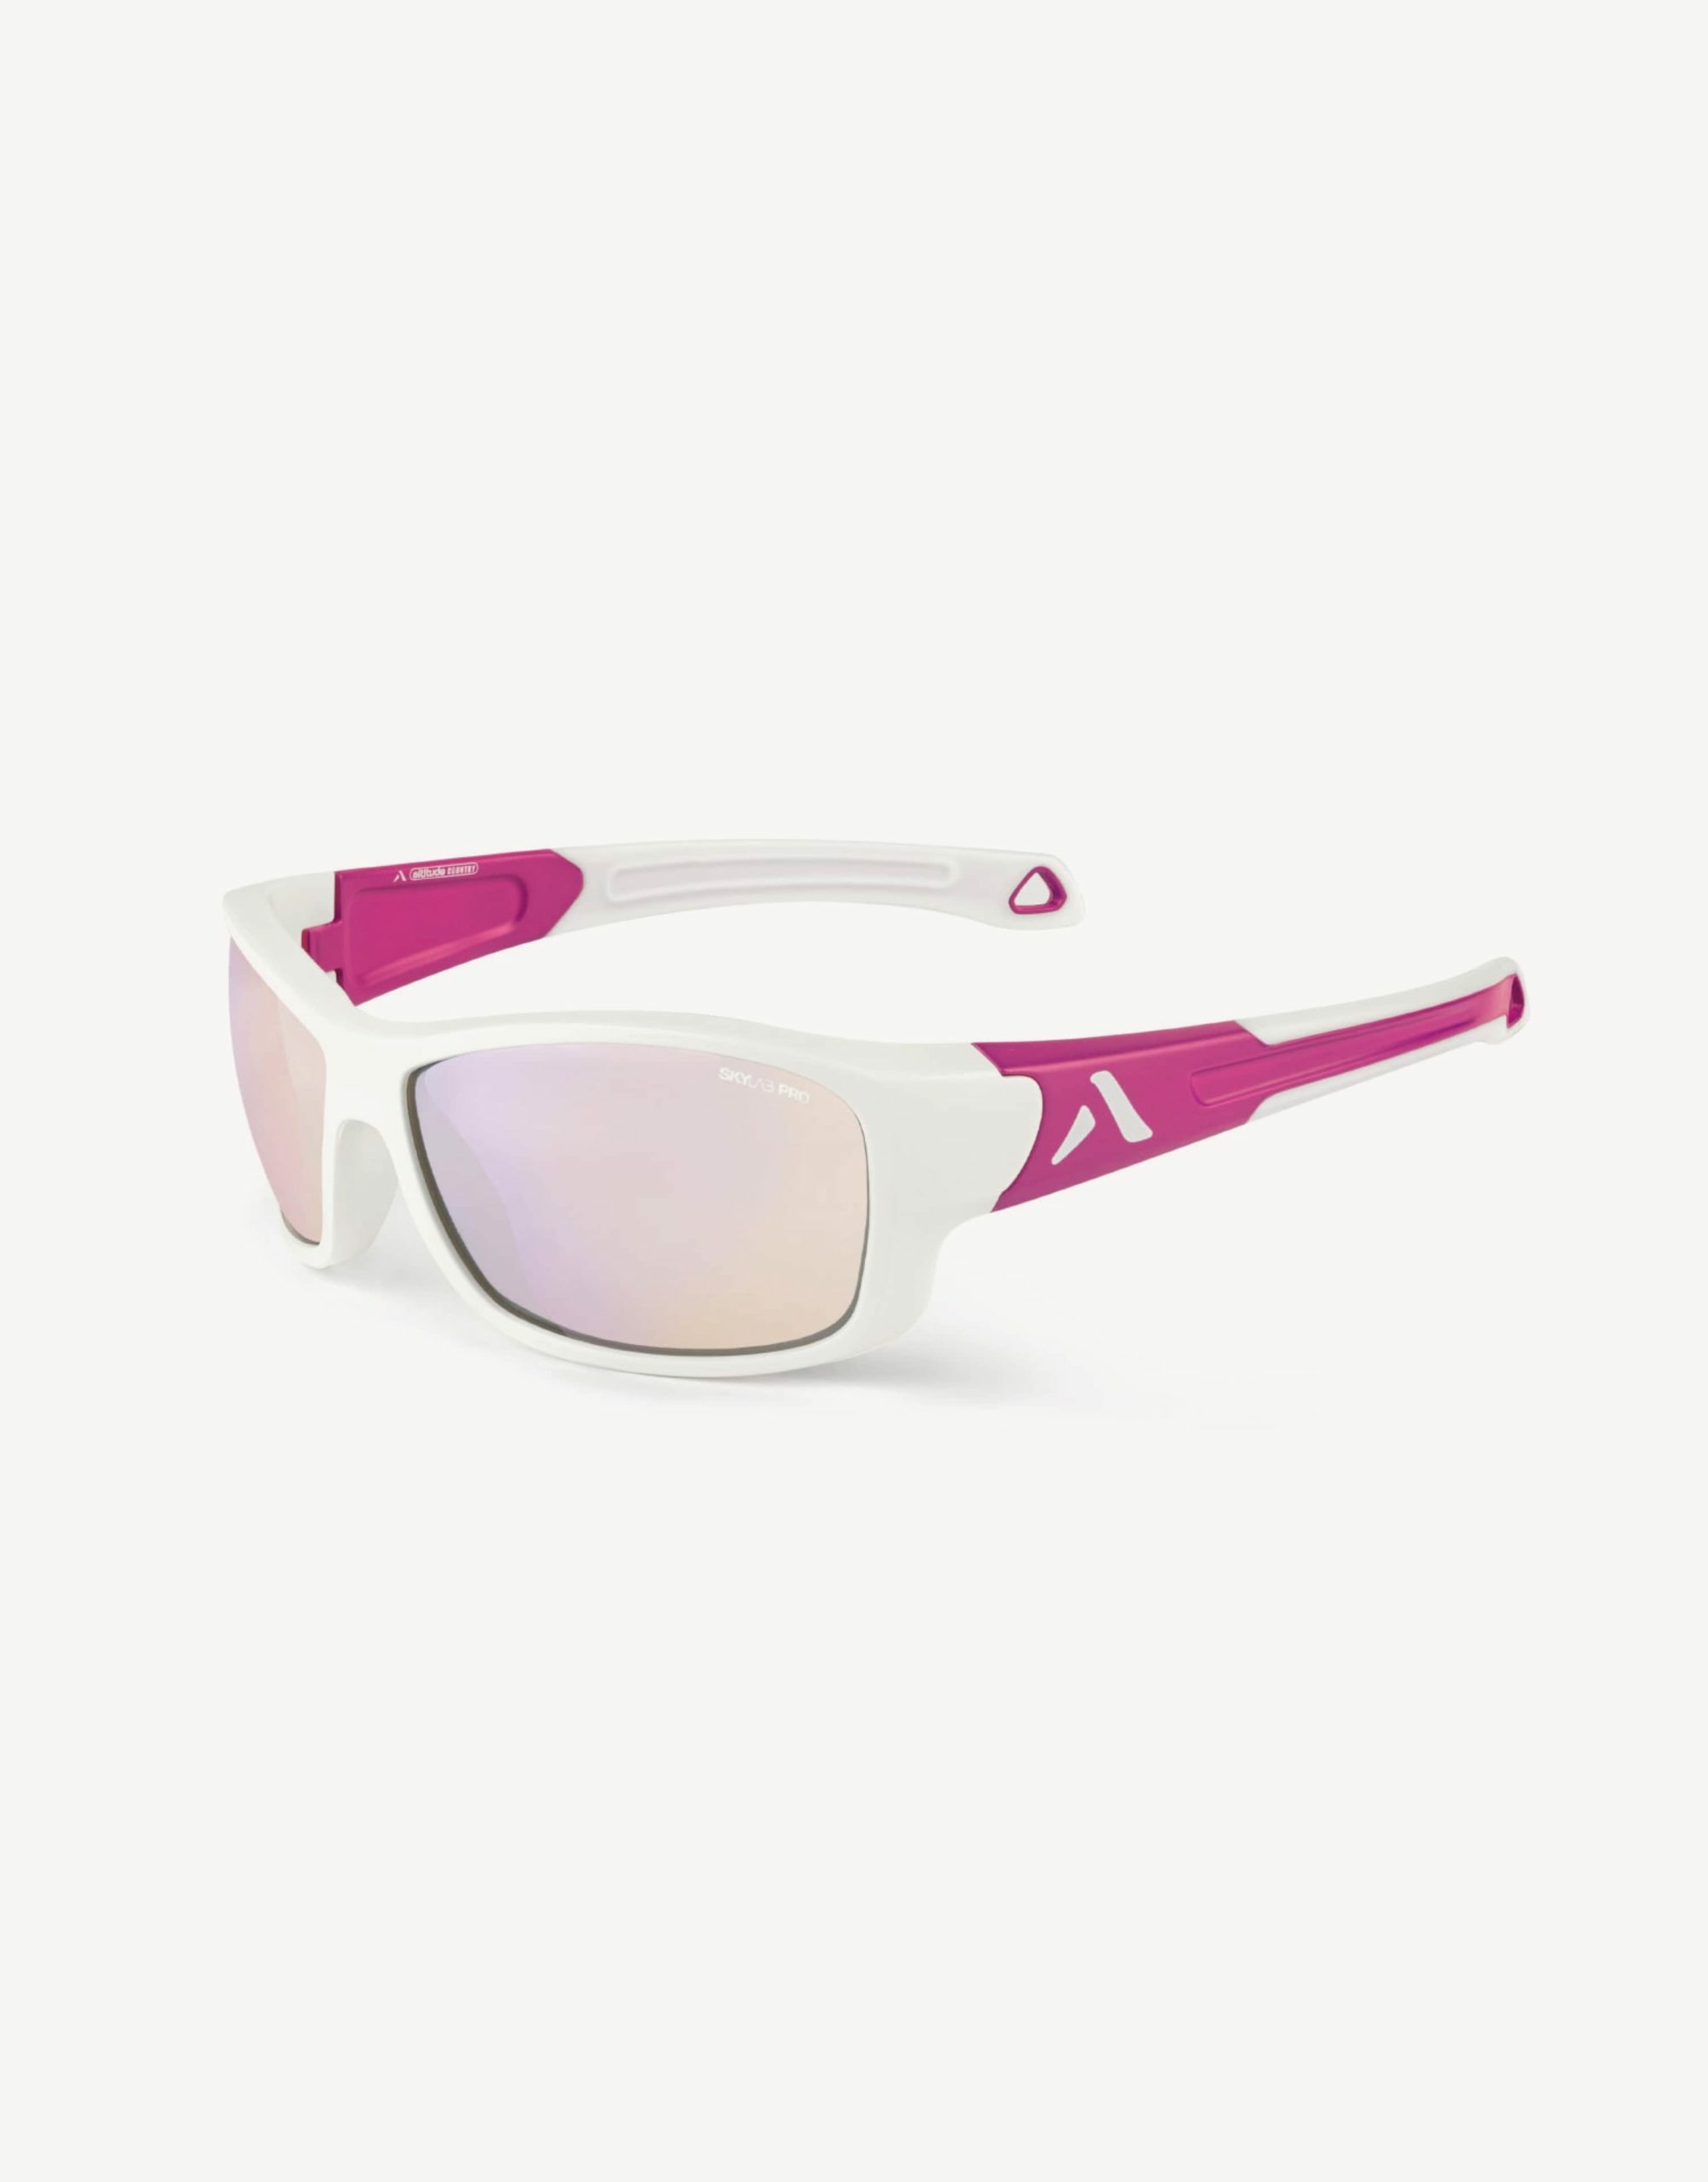 Country-lunette-altitude-blanc-rose-polar-pro-min-scaled